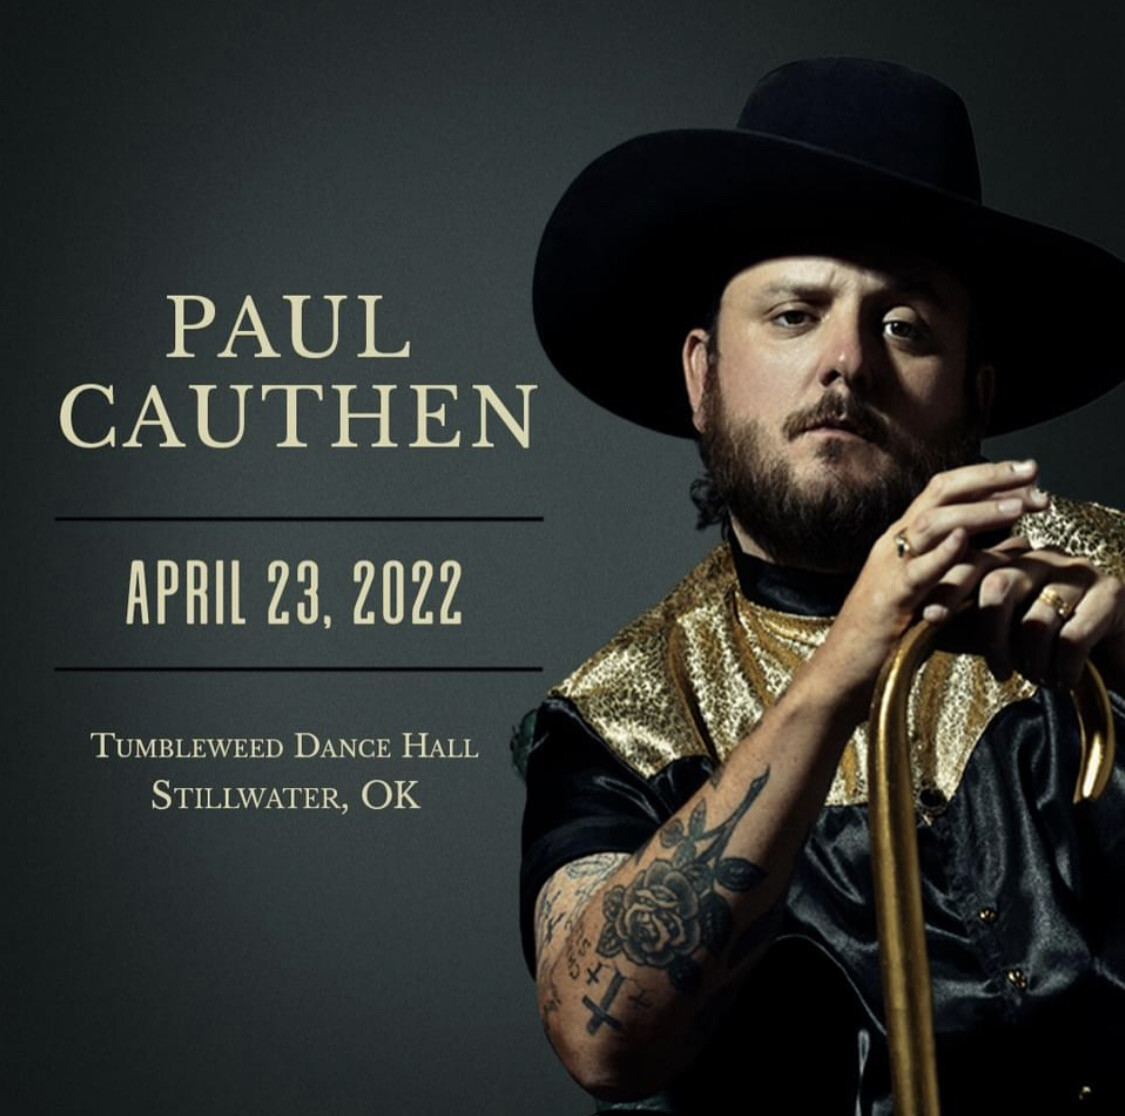 Paul Cauthen Saturday ( $30 DISCOUNT WHEN PURCHASING 4 TICKETS TOGETHER) - April 23 2022 DOS